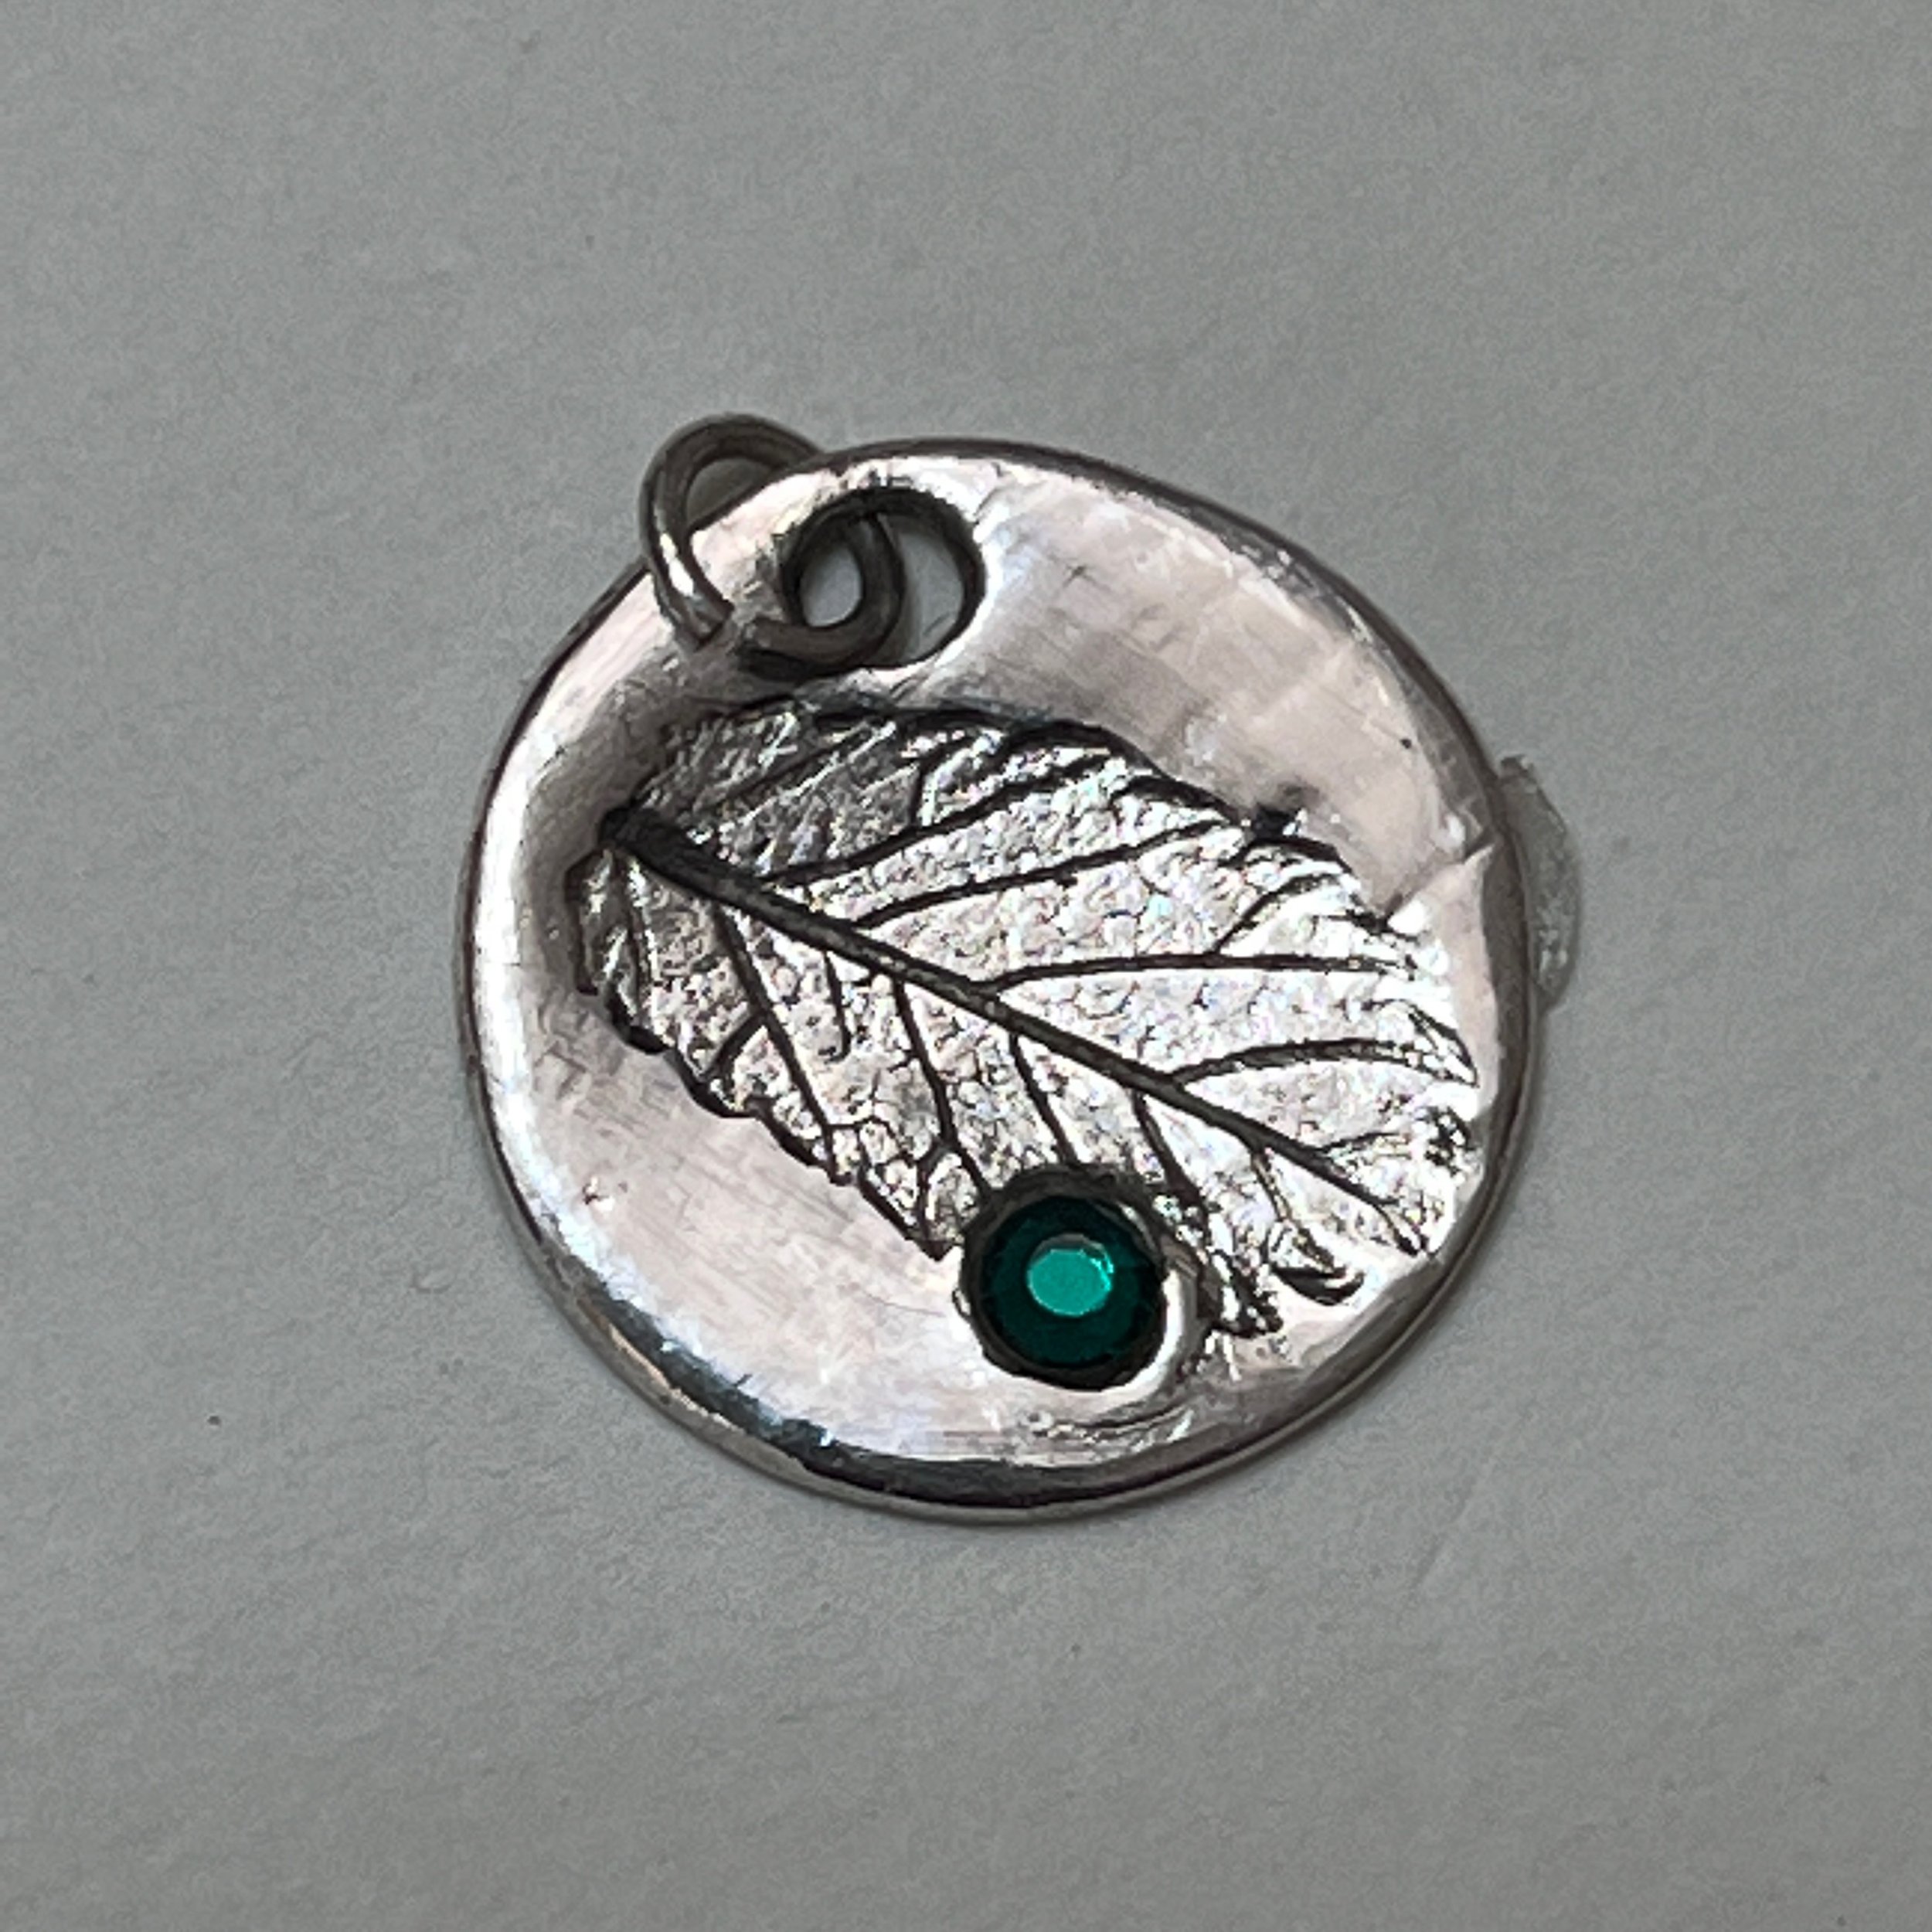 How To Make A Silver Clay Leaf Pendant 